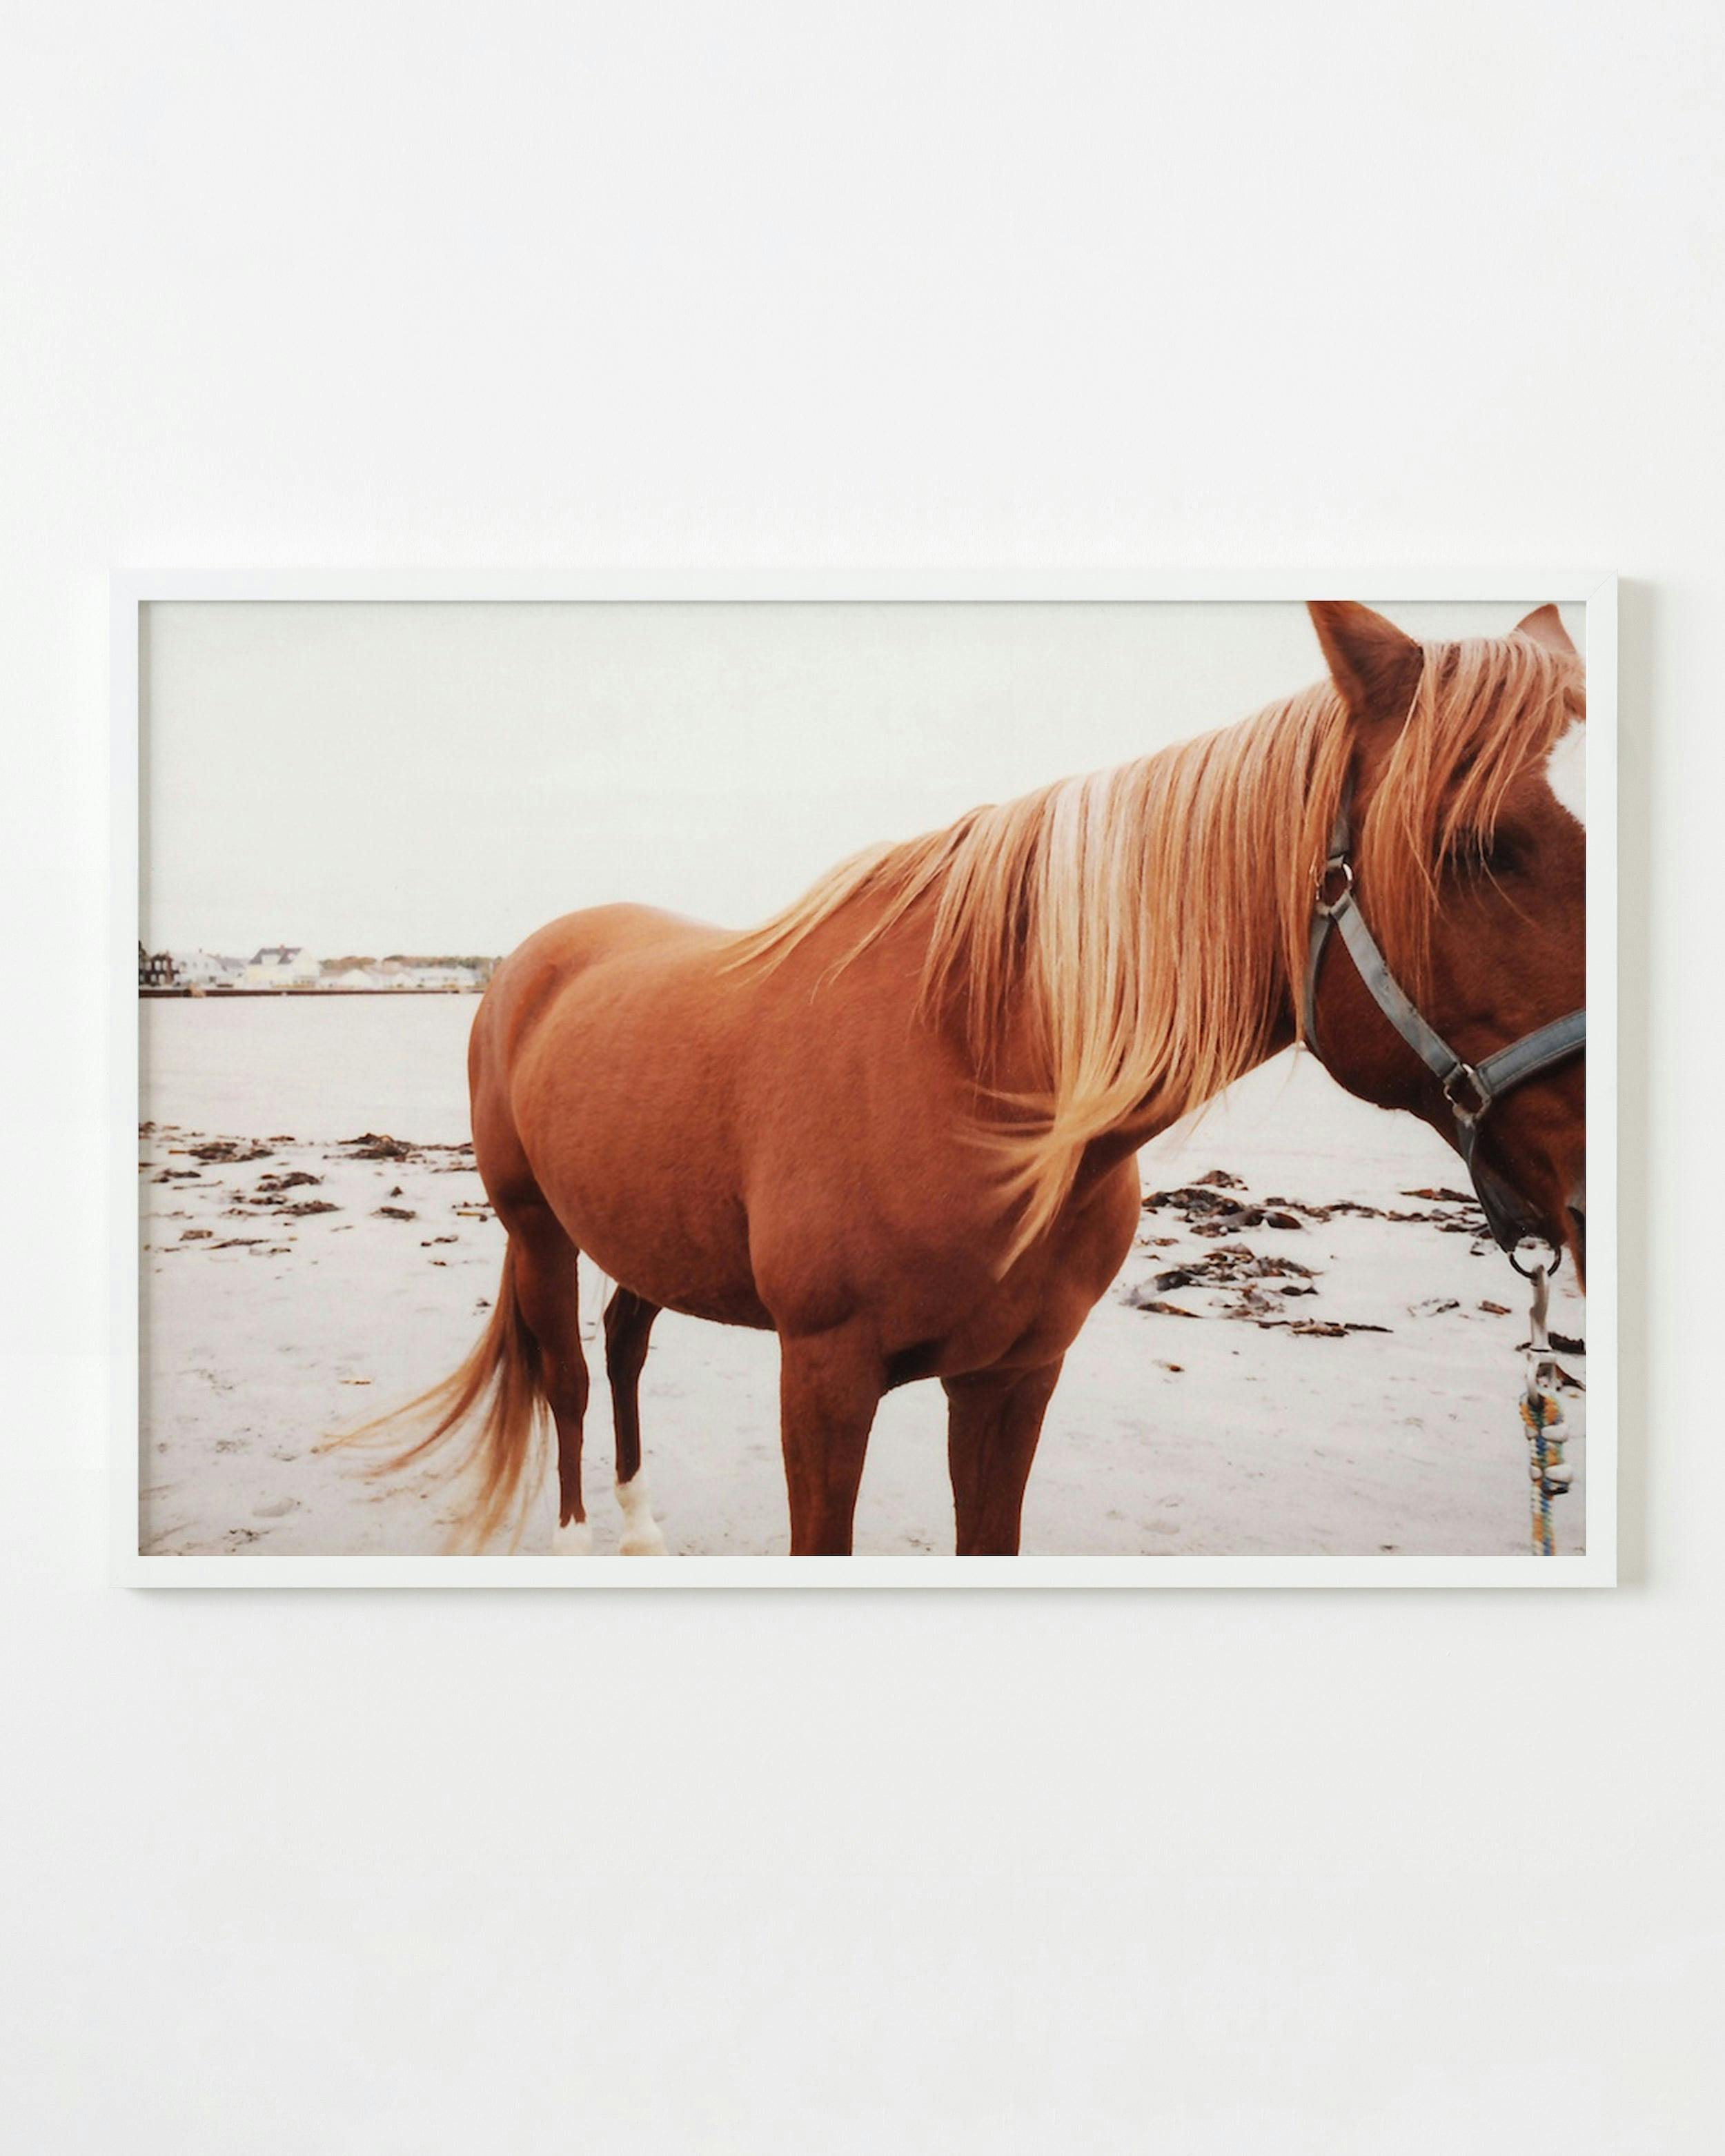 Photography by Anna Moller titled "Maine Horse".